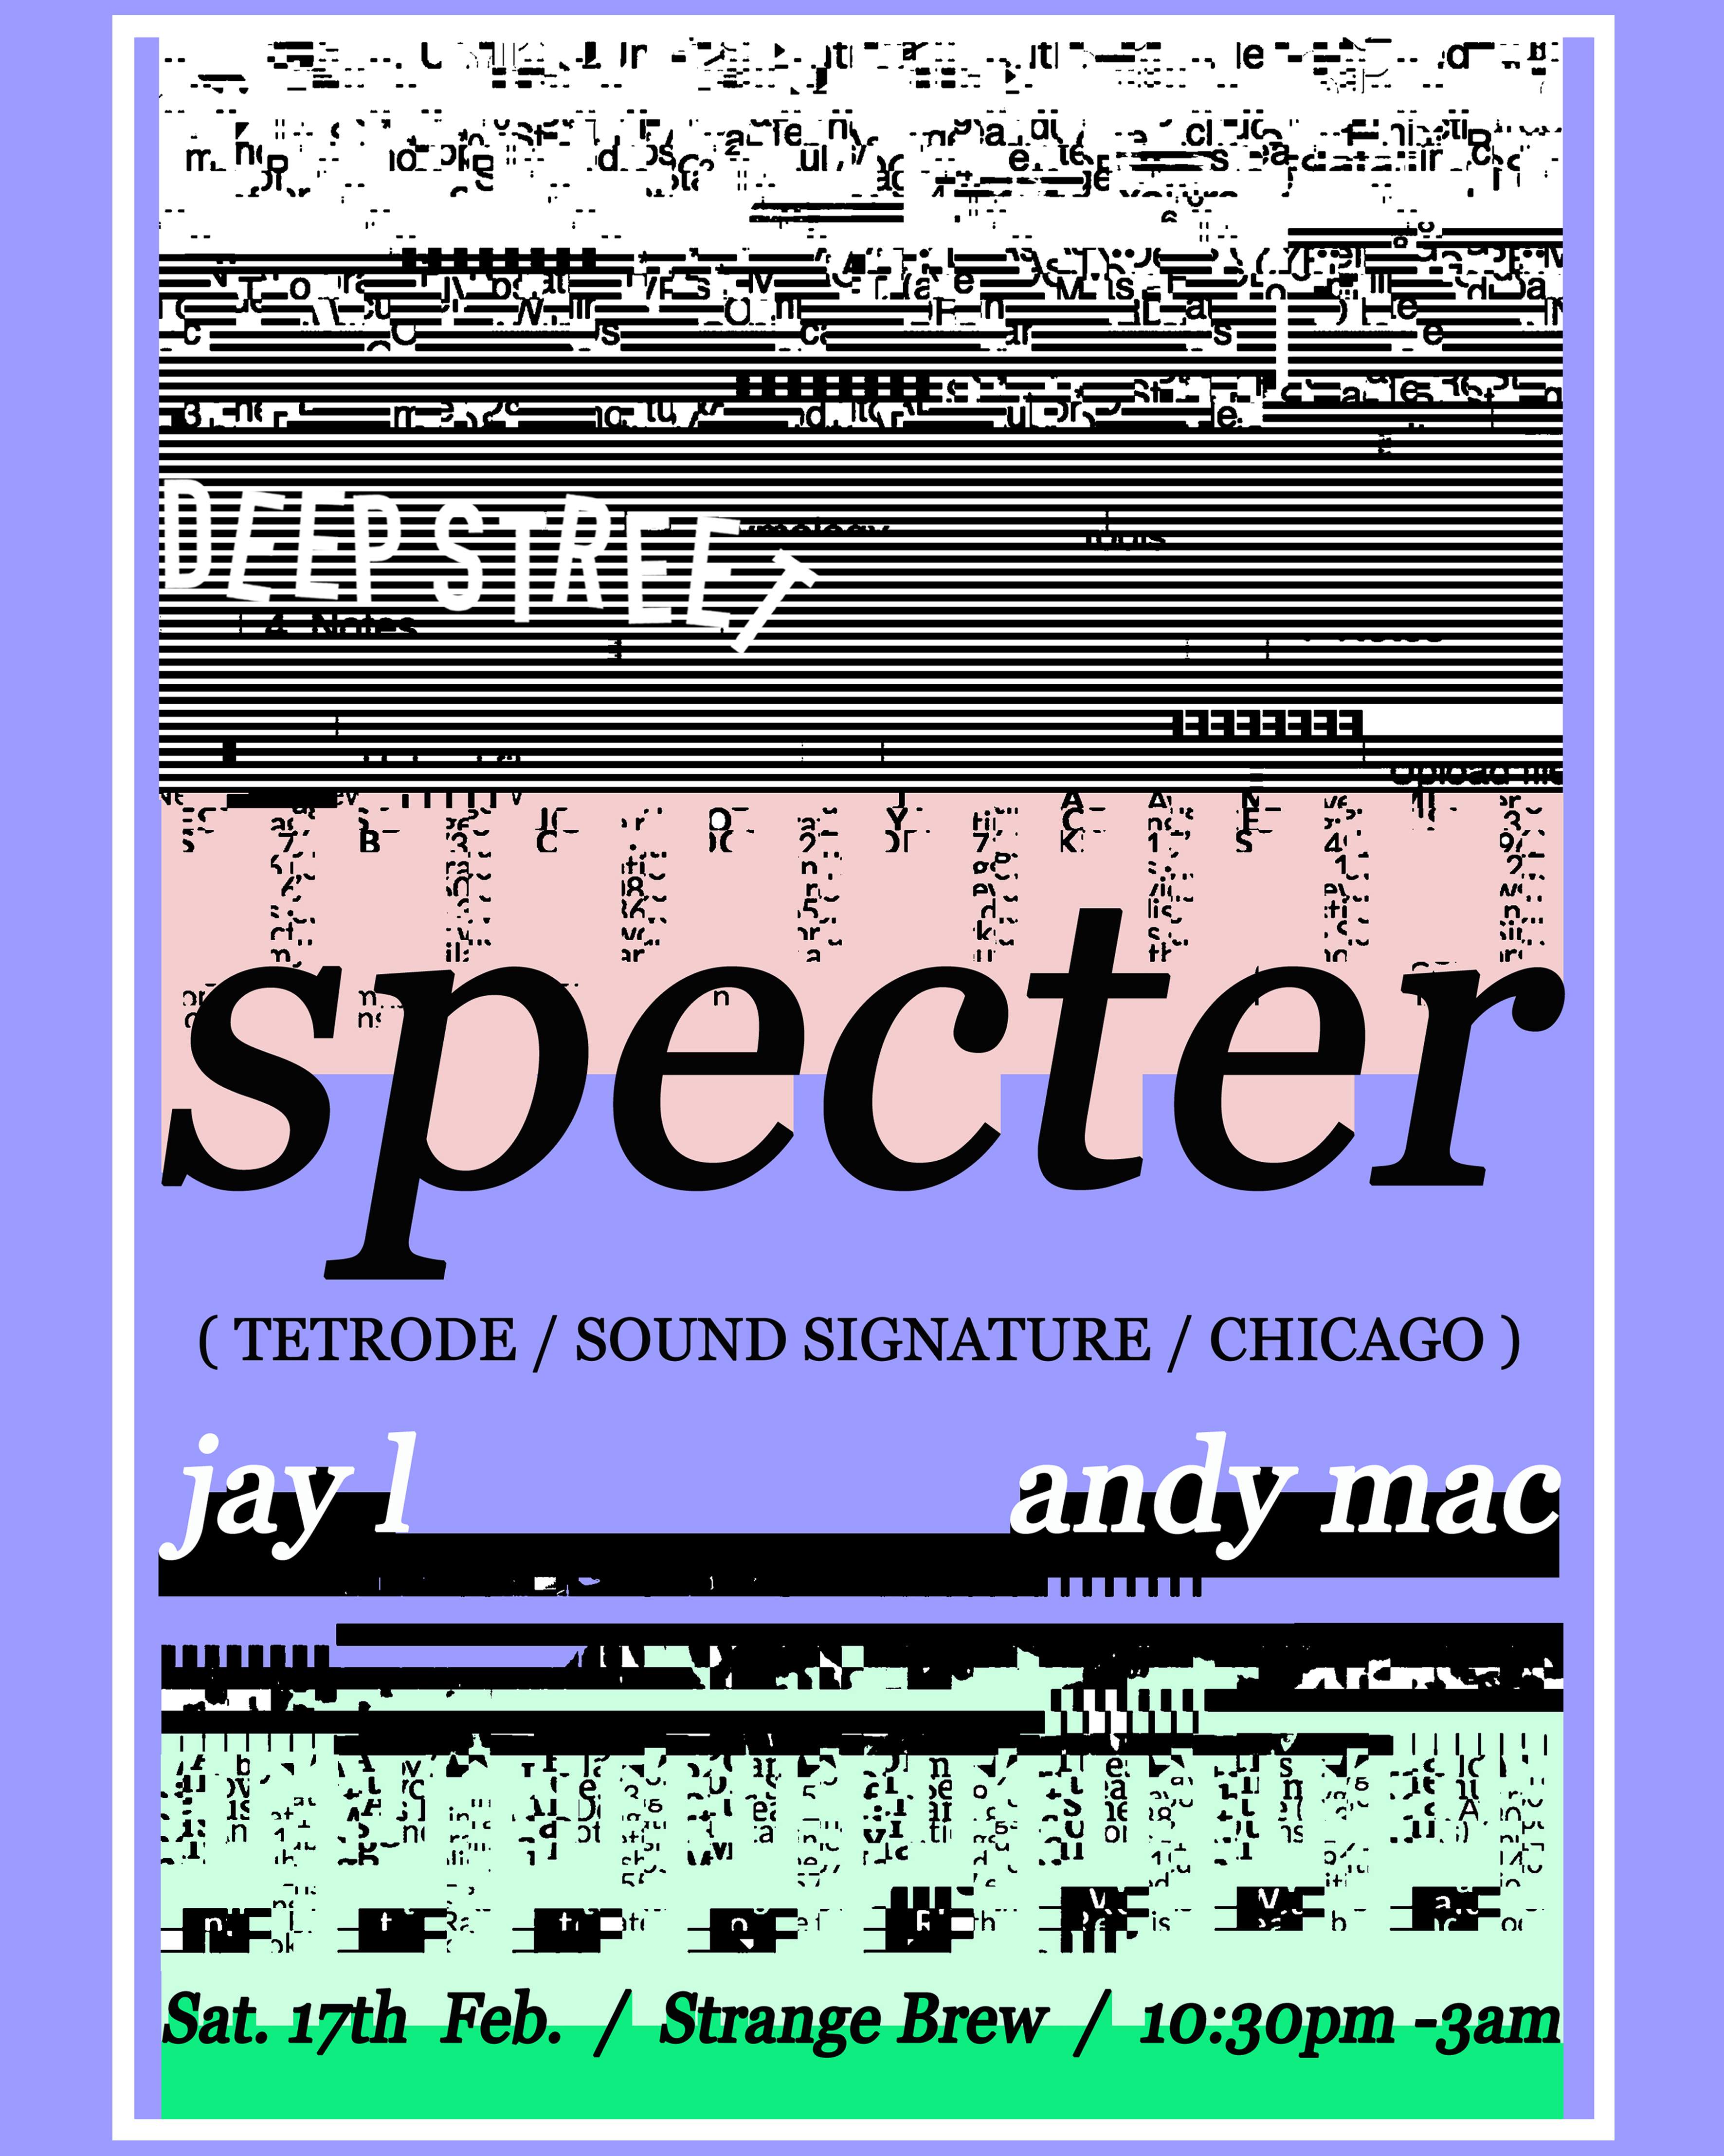 Deep Street with Specter (Sound Signature / Chicago) - フライヤー表